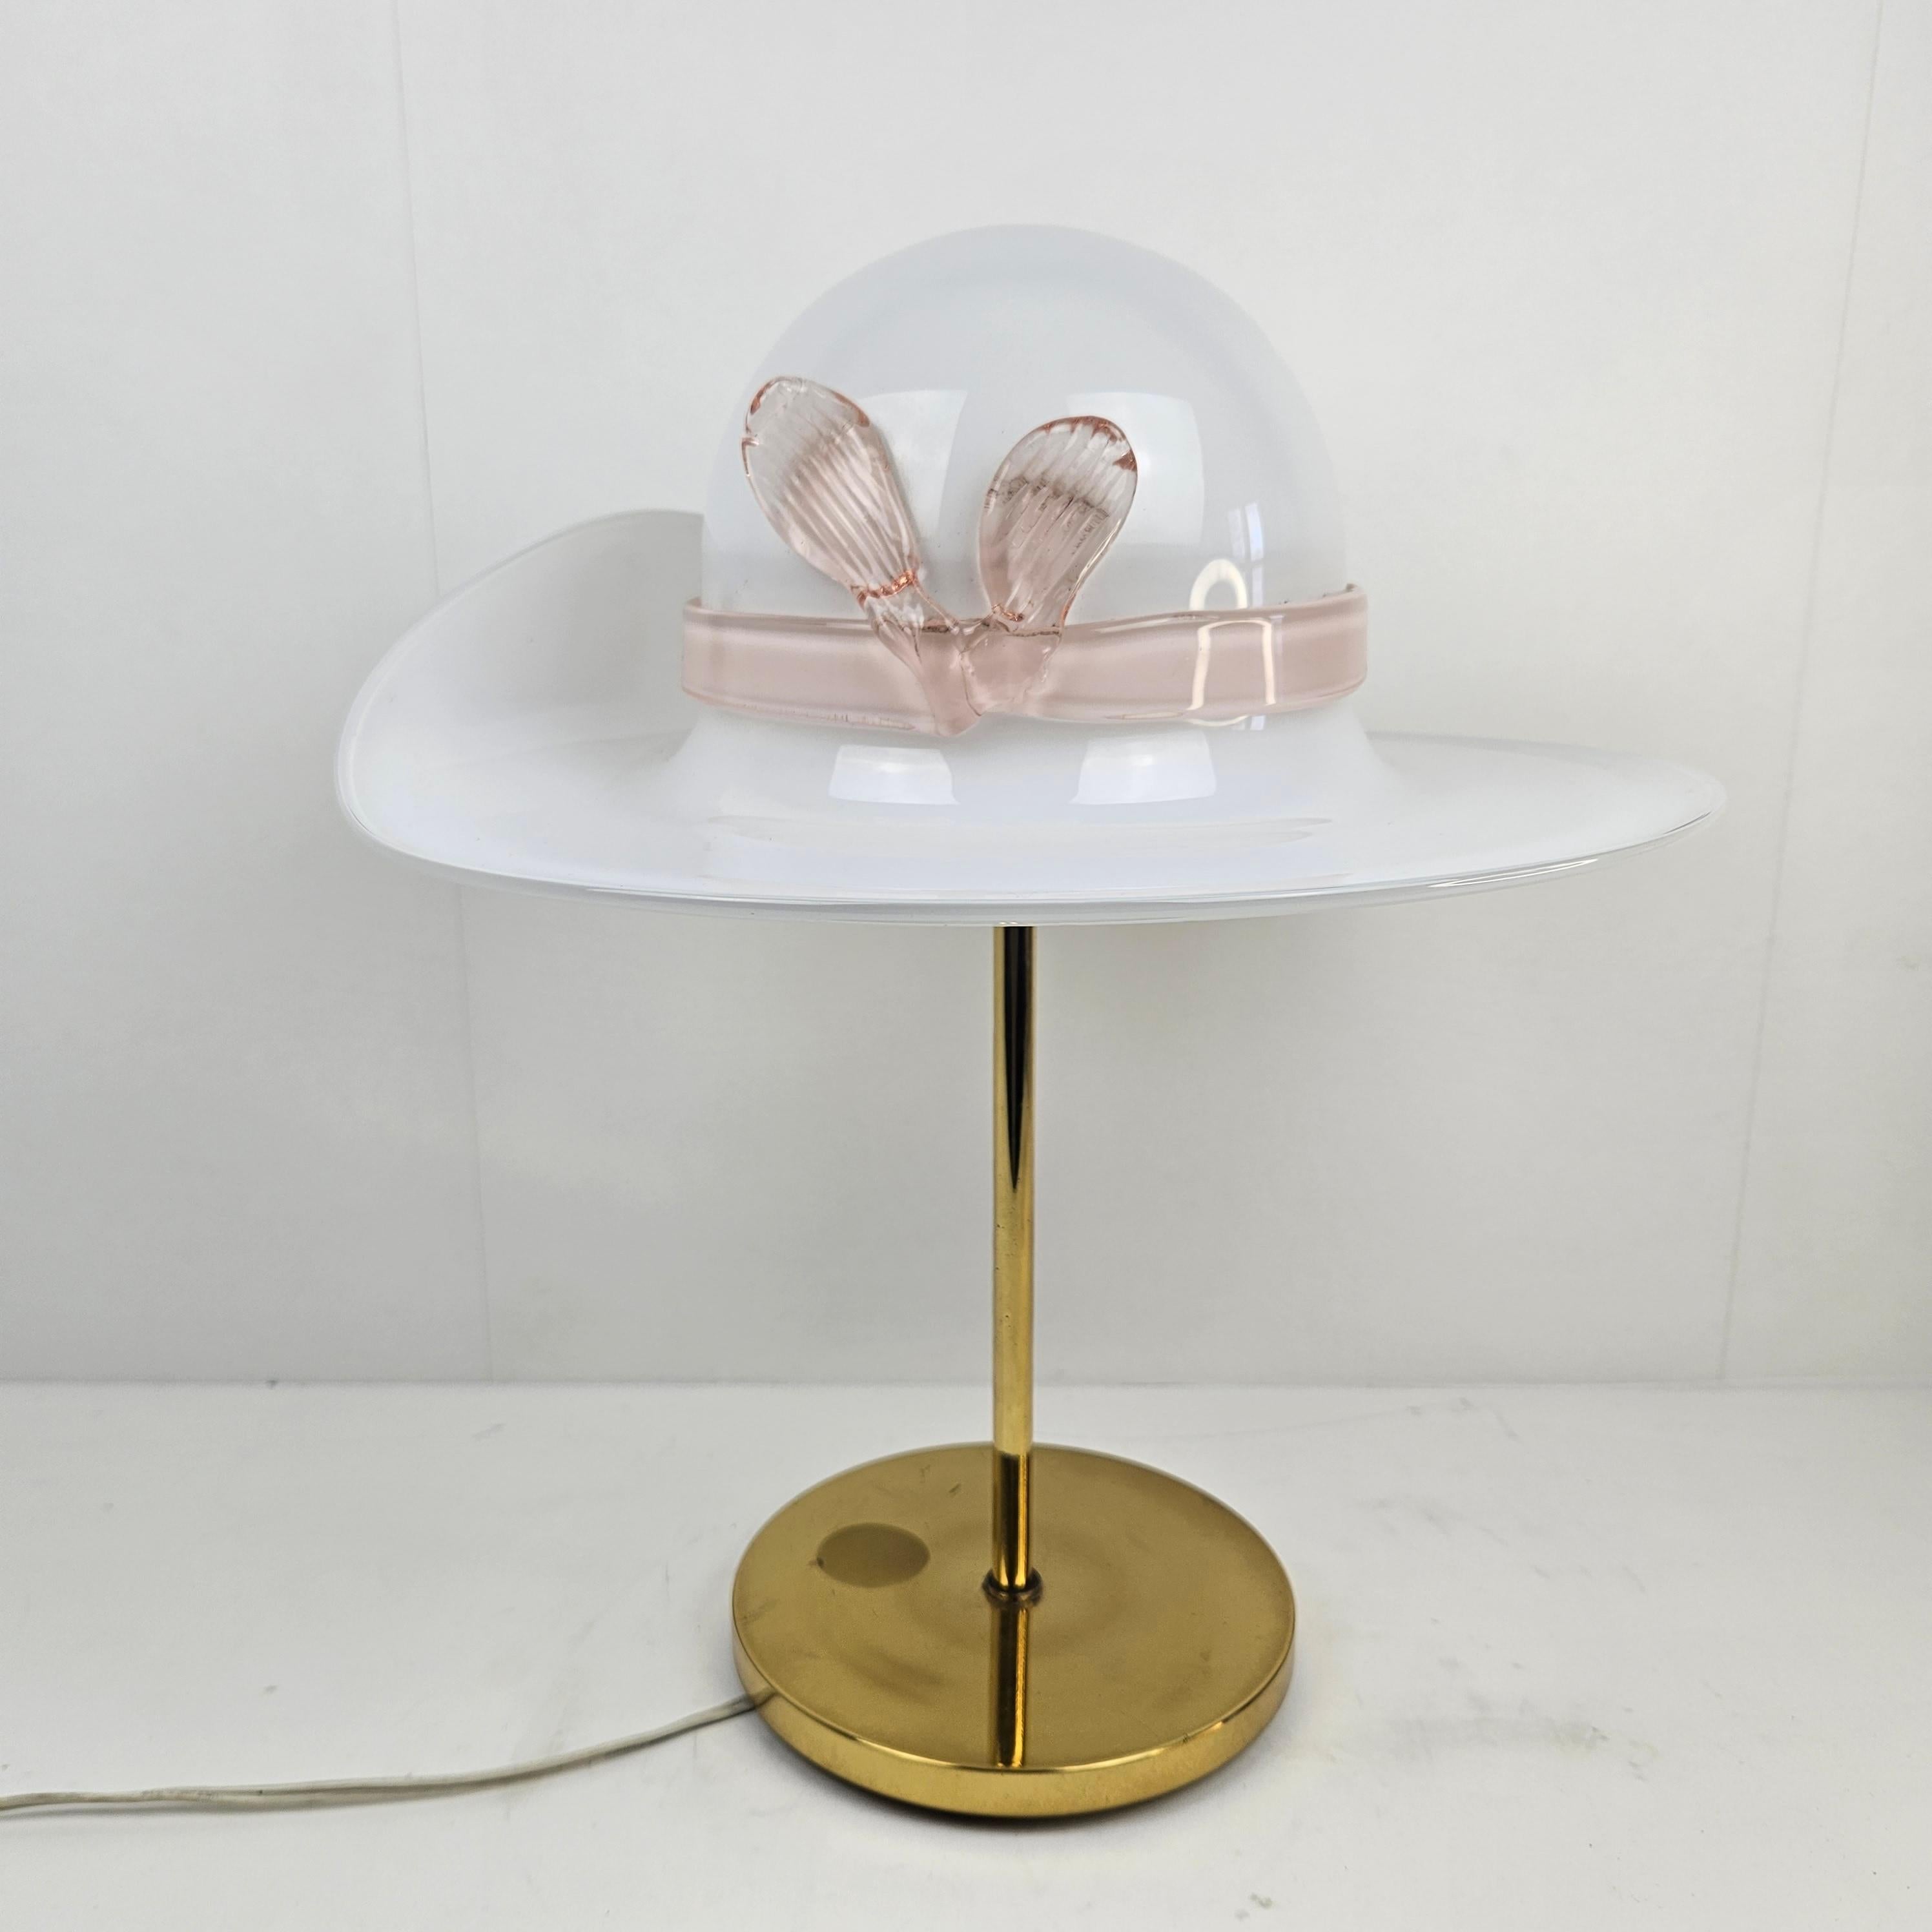 Very beautiful and cute table lamp.
This exceptional lamp is fabricated in the 70's in Italy.

The hand blown glass shade is made in Murano.
It has the shape of a lady's hat and it is made of very nice pink Murano glass.

The glass is in very good